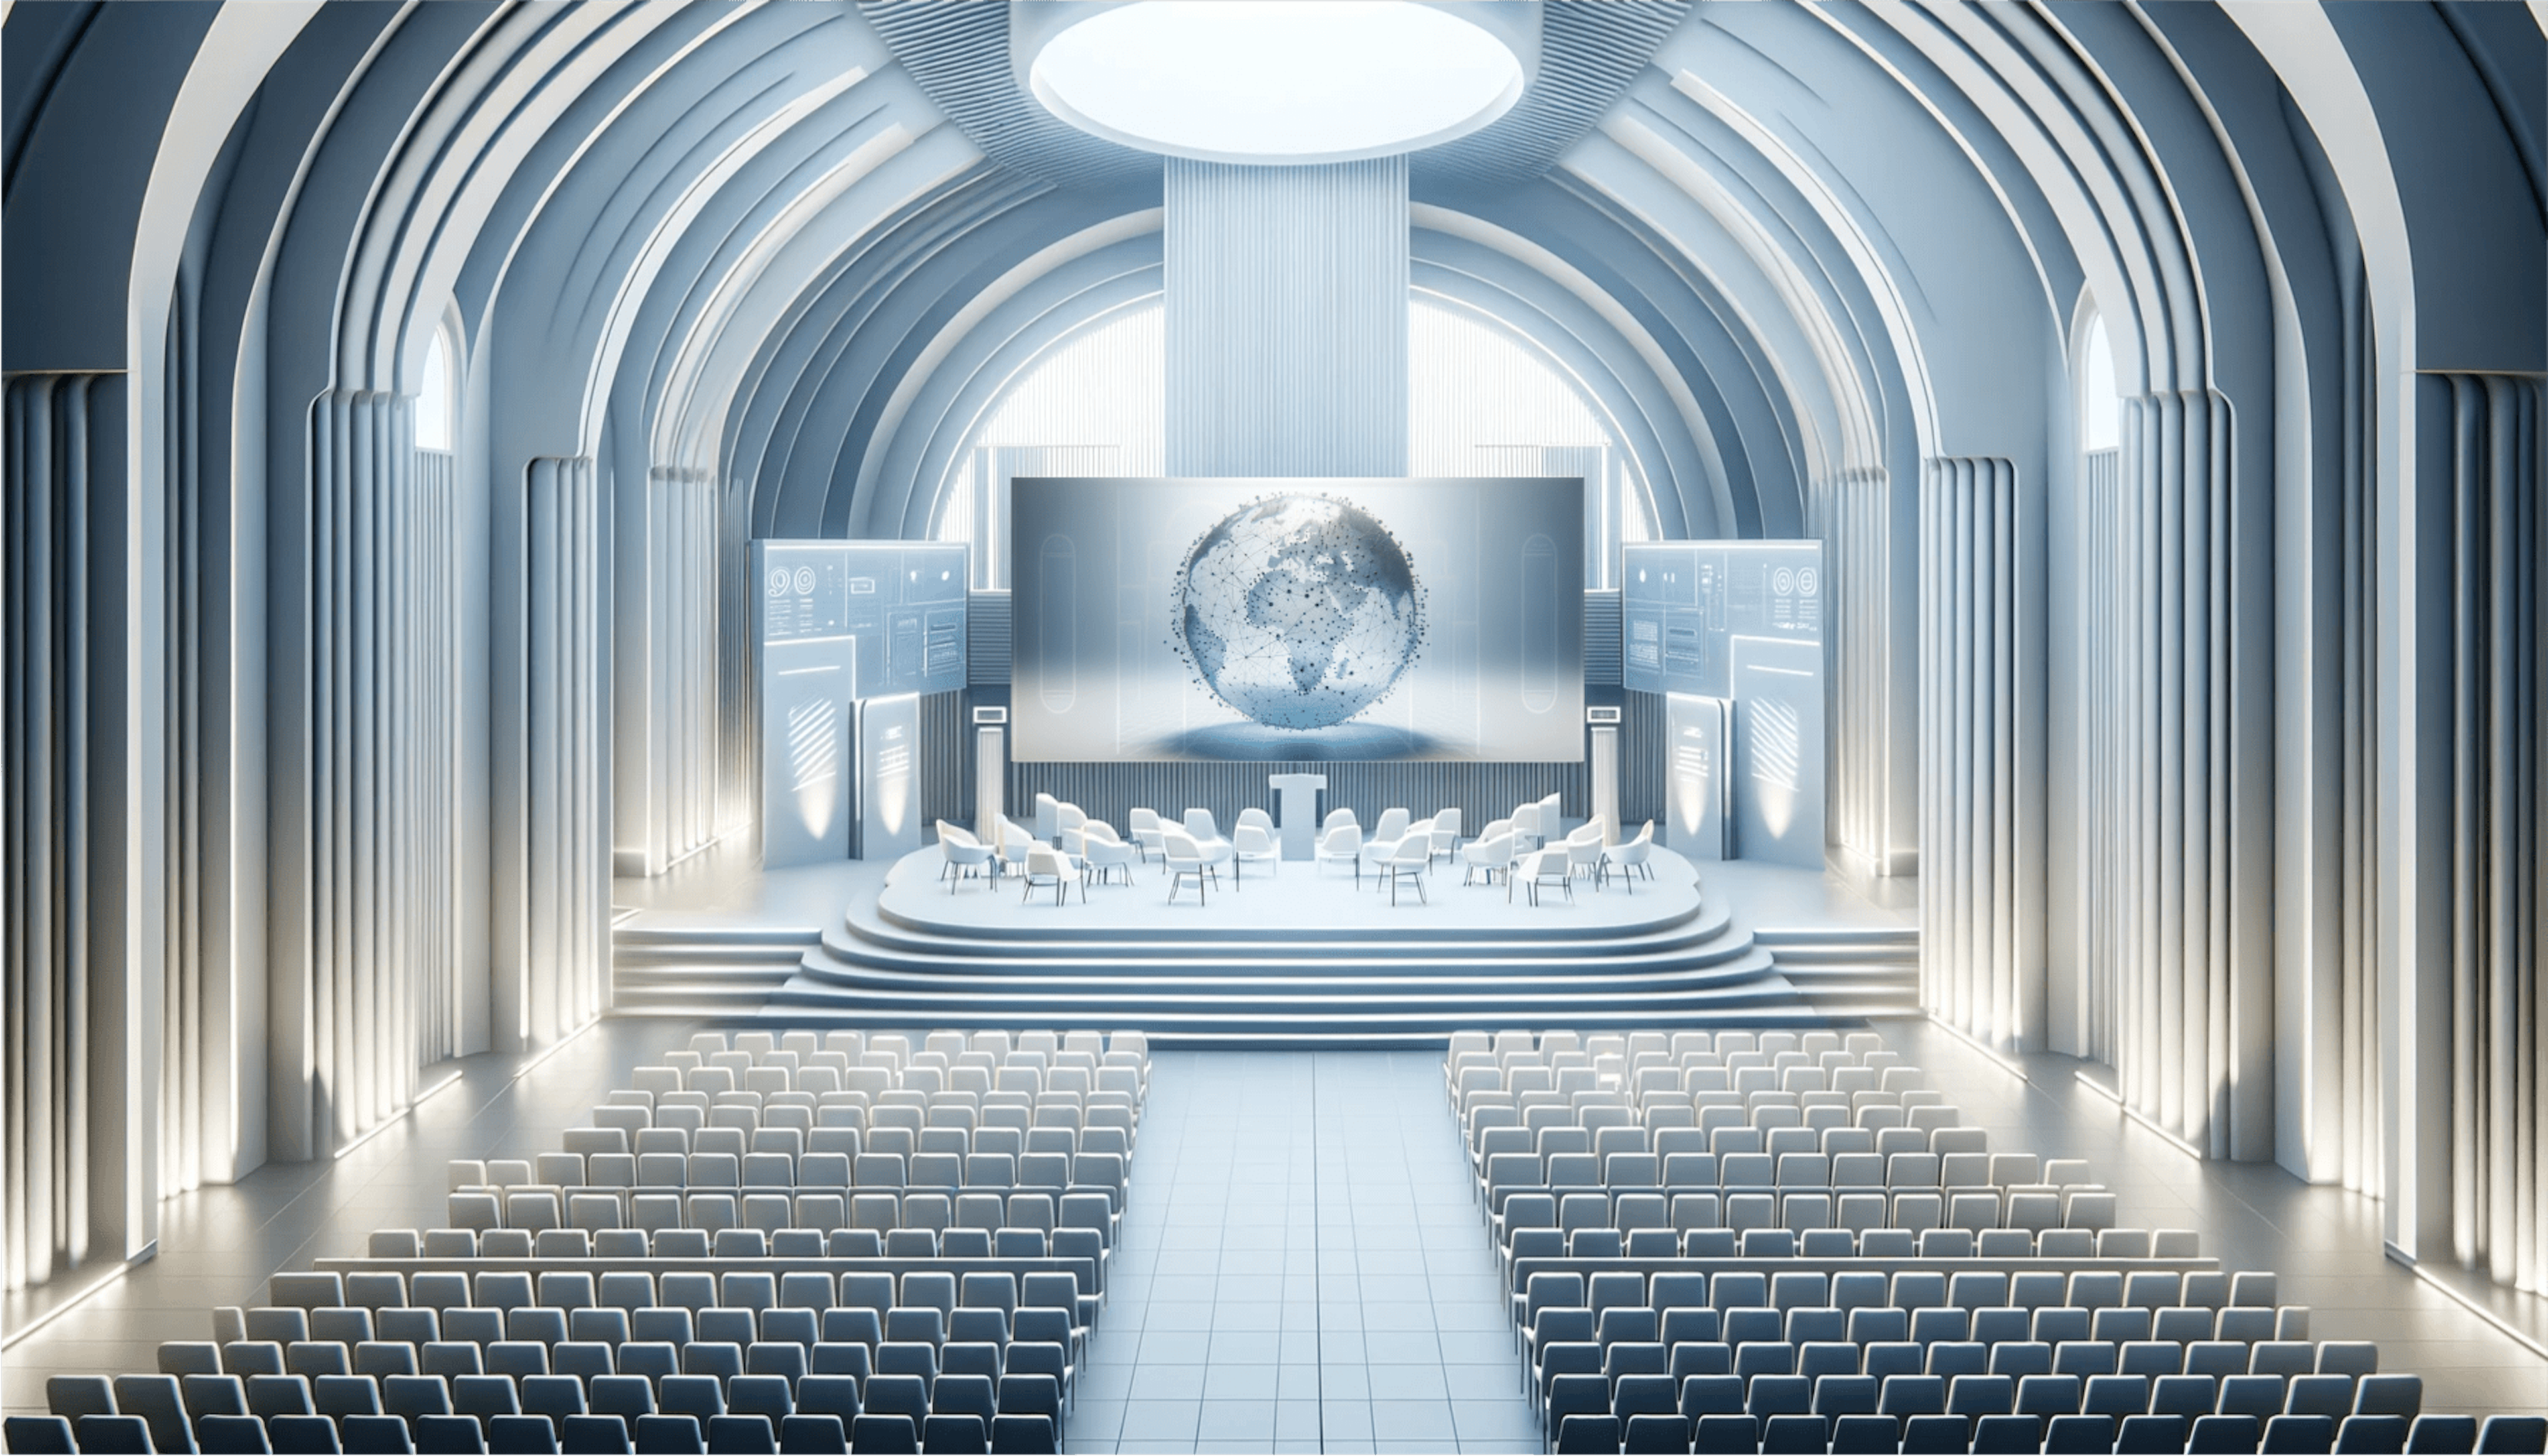 Auditorium with rows of seats facing a stage displaying a digital Earth image, surrounded by modern lighting and panels.